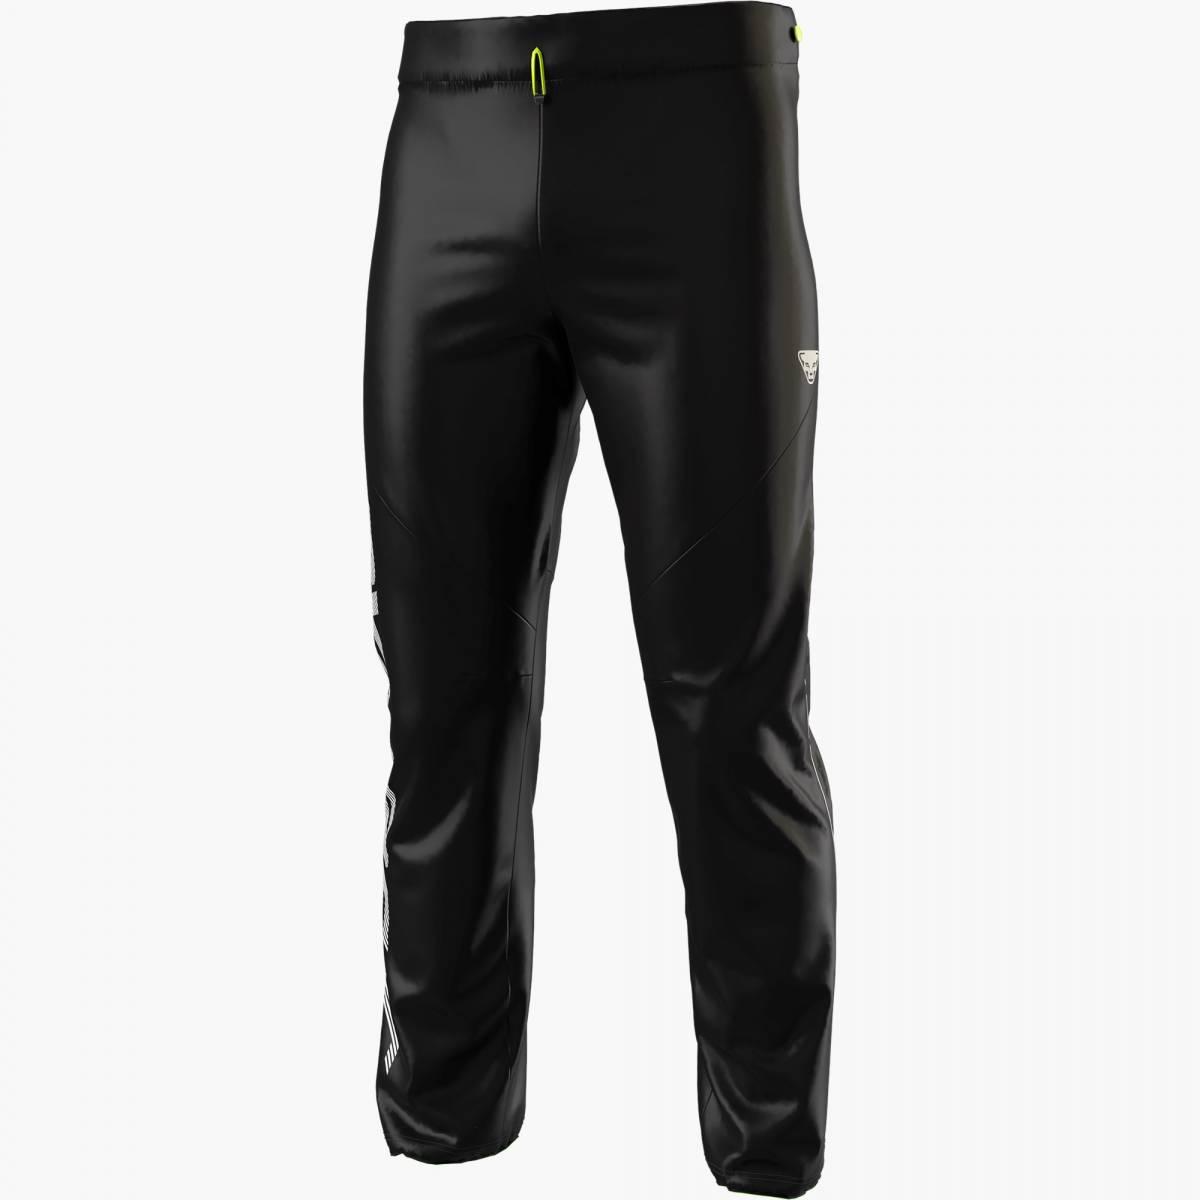 DNA RACE WIND PANT